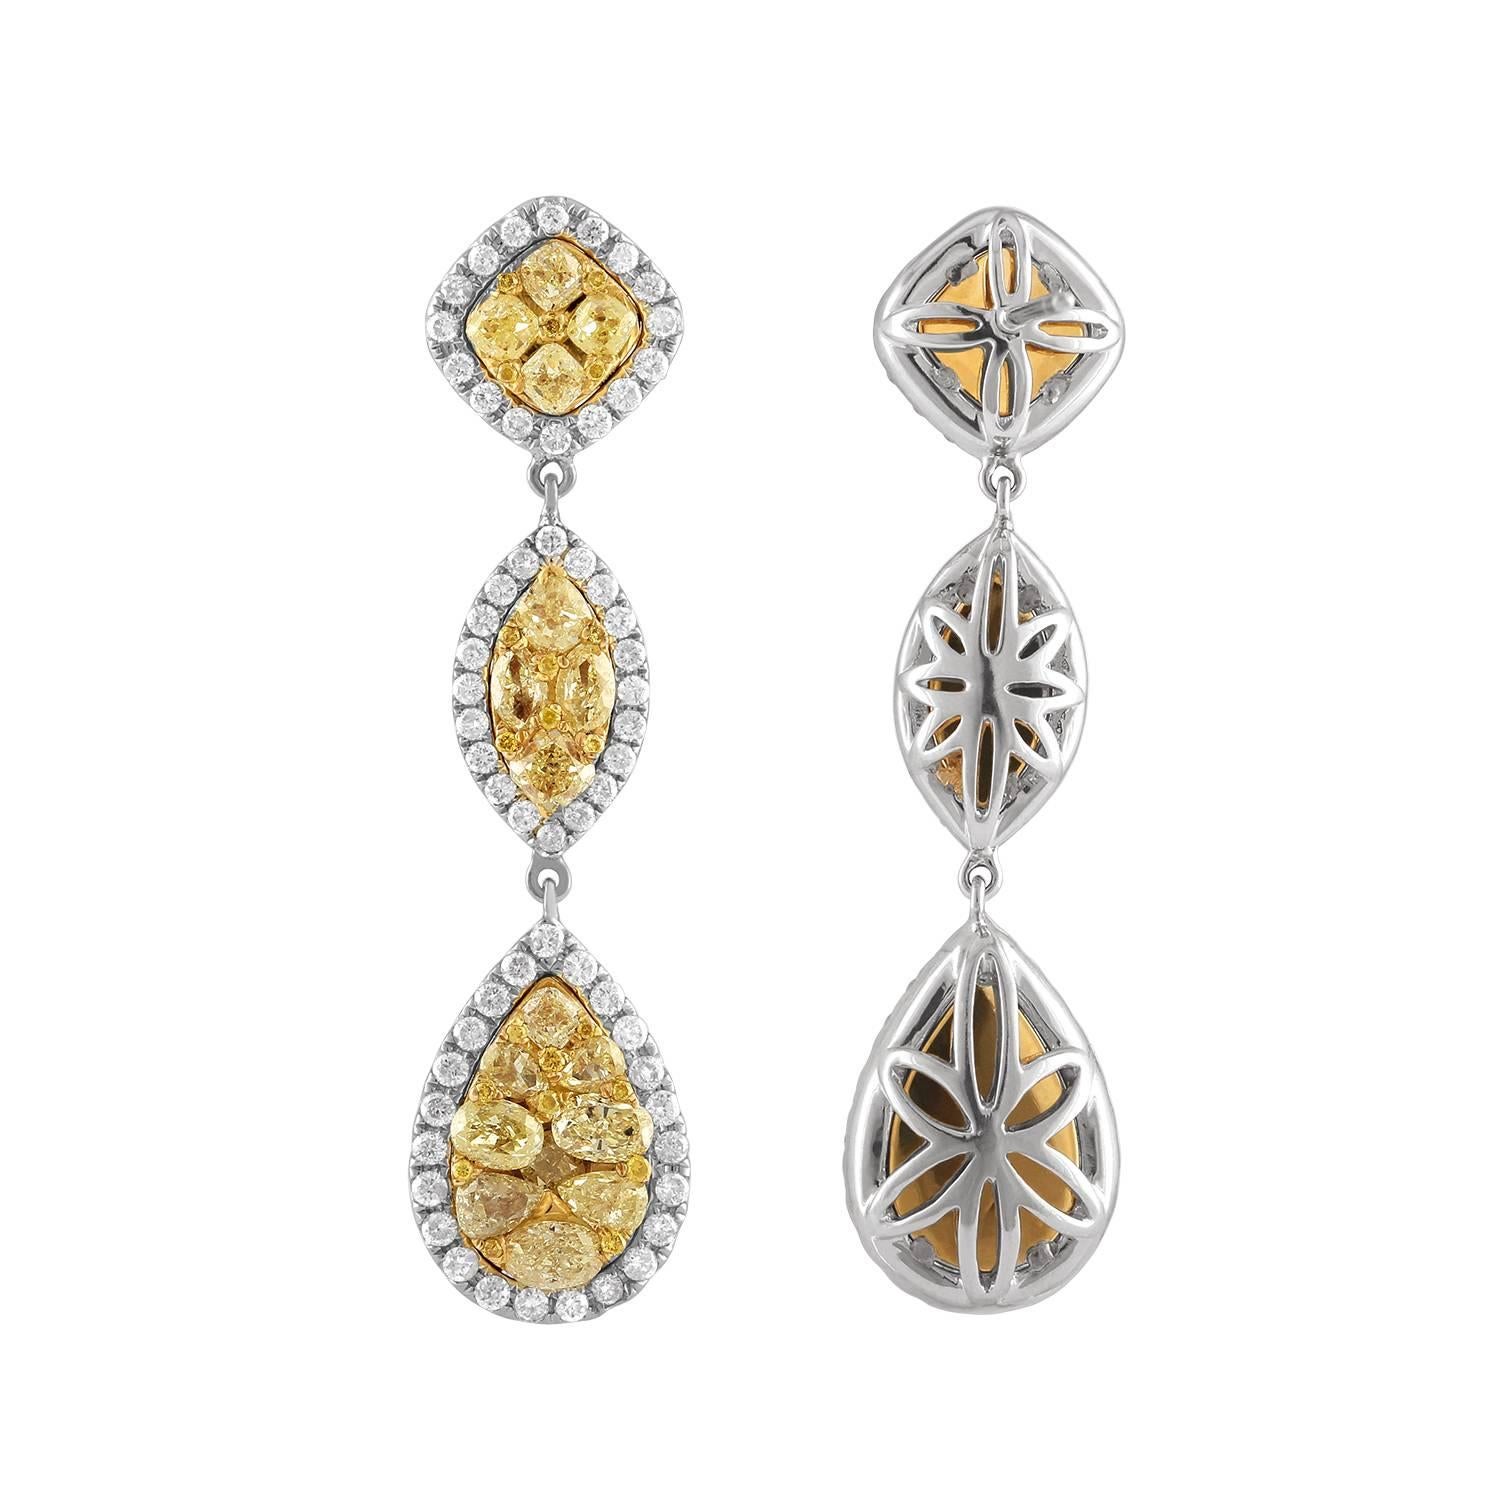 Fancy Diamond Shapes Drop Earrings. This Earring set has Square, Marquise and Pear Shape boxes. Each box has Yellow Diamonds inside surrounded by White Diamonds on the outside. 118 Round Brilliants are surrounding the 32 Fancy Shapes - Yellow